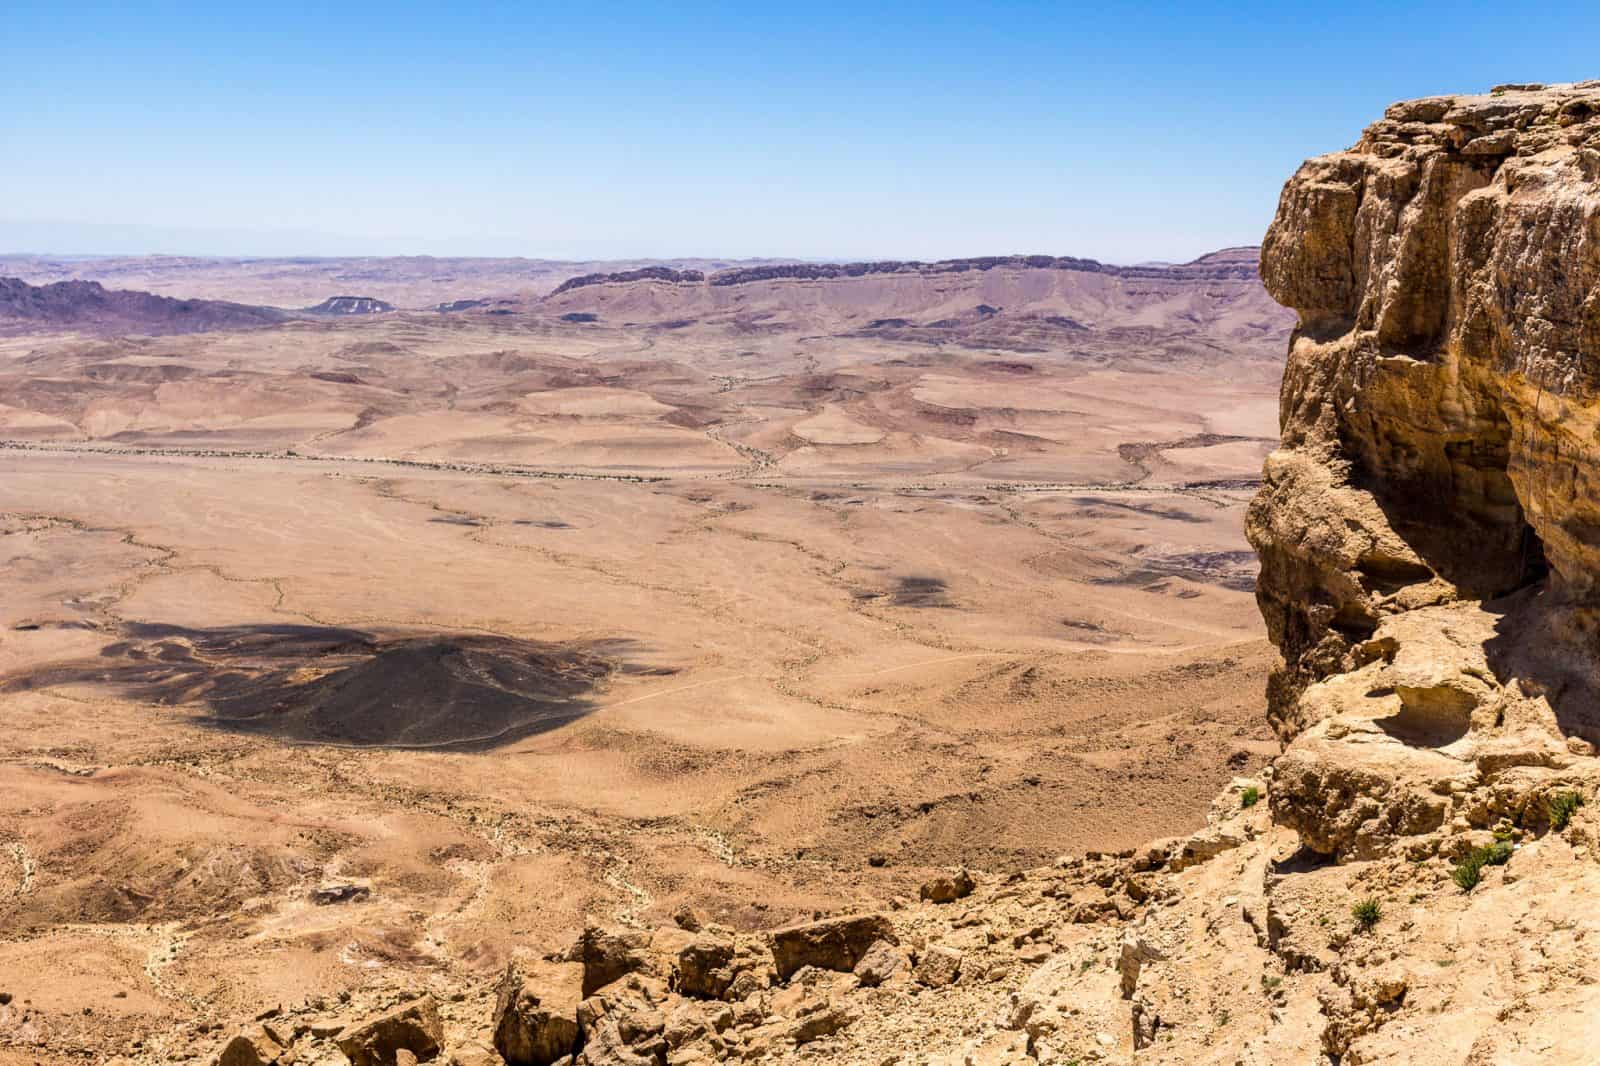 Inside the Ramon Crater